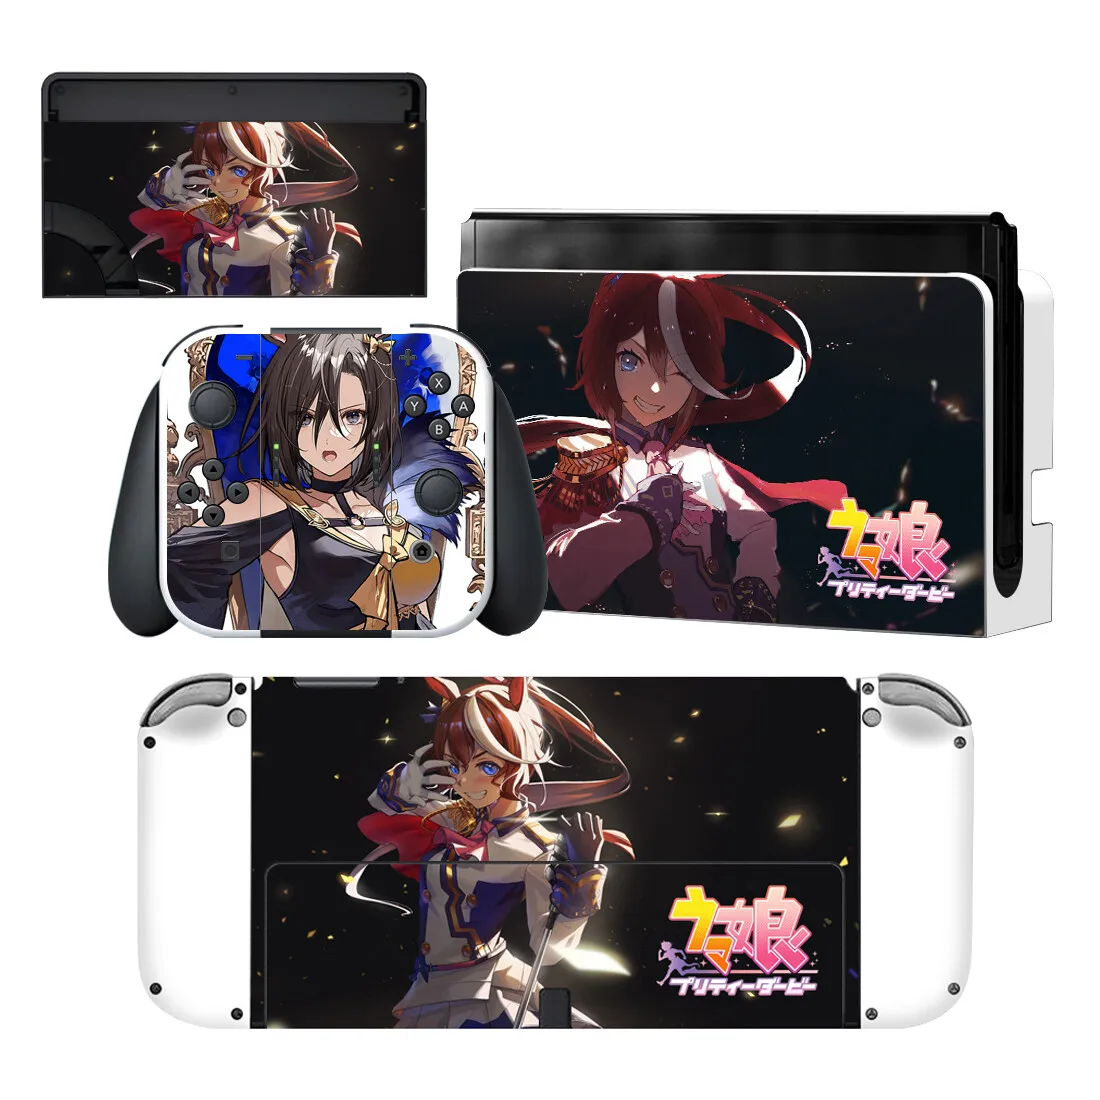 

Anime Style Vinyl Decal Skin Sticker For Nintendo Switch OLED Console Protector Game Accessoriy NintendoSwitch OLED